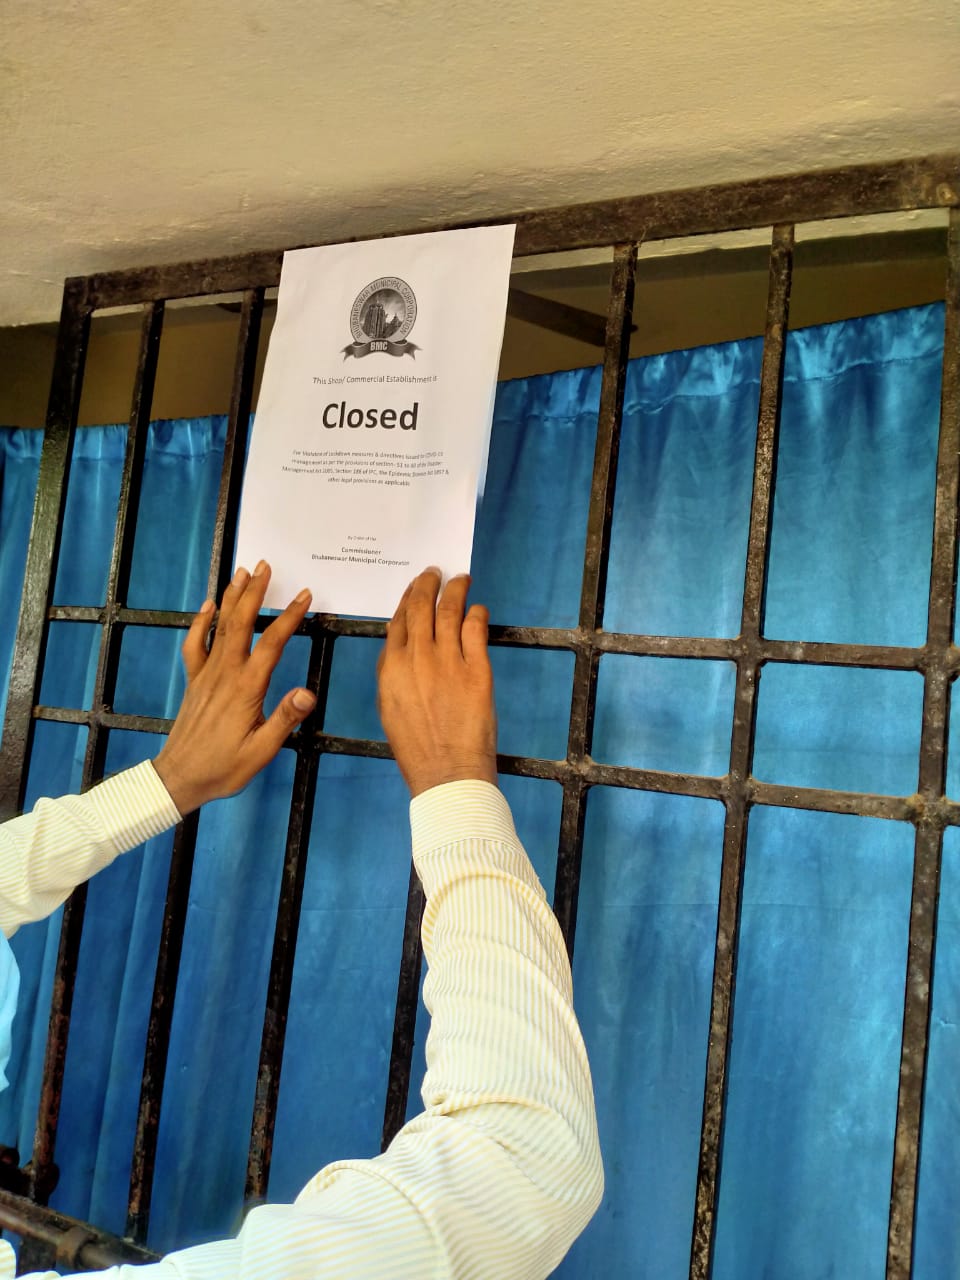 Private Coaching Centre Sealed In Odisha Capital For COVID Norms Violation